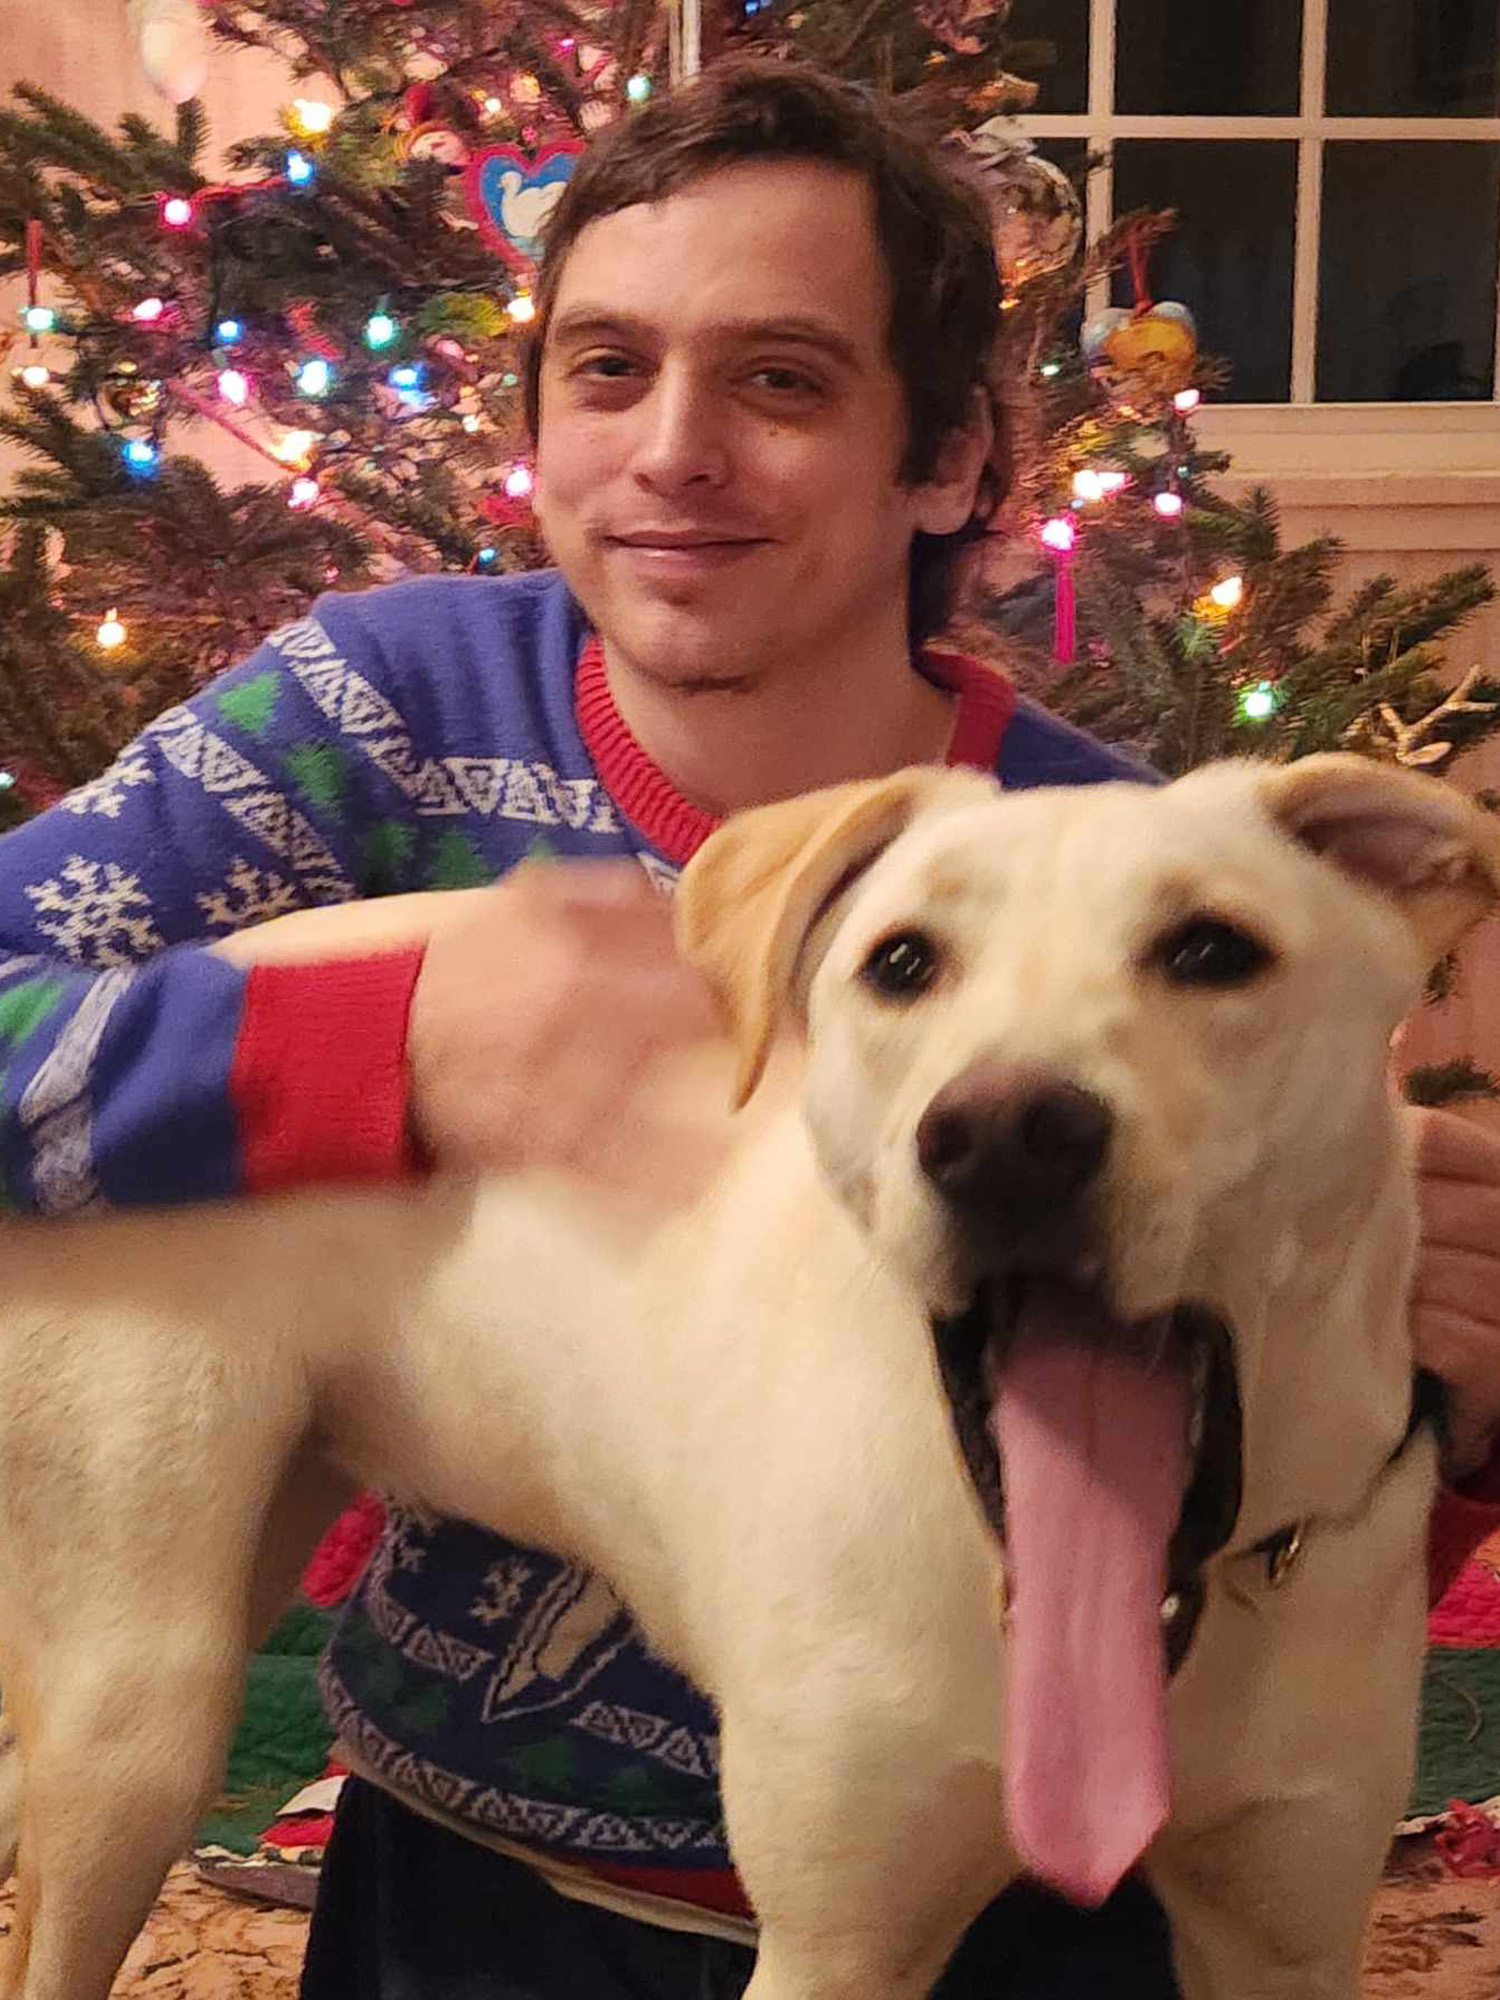 Merry Christmas from Connecticut from me and my ball of chaos